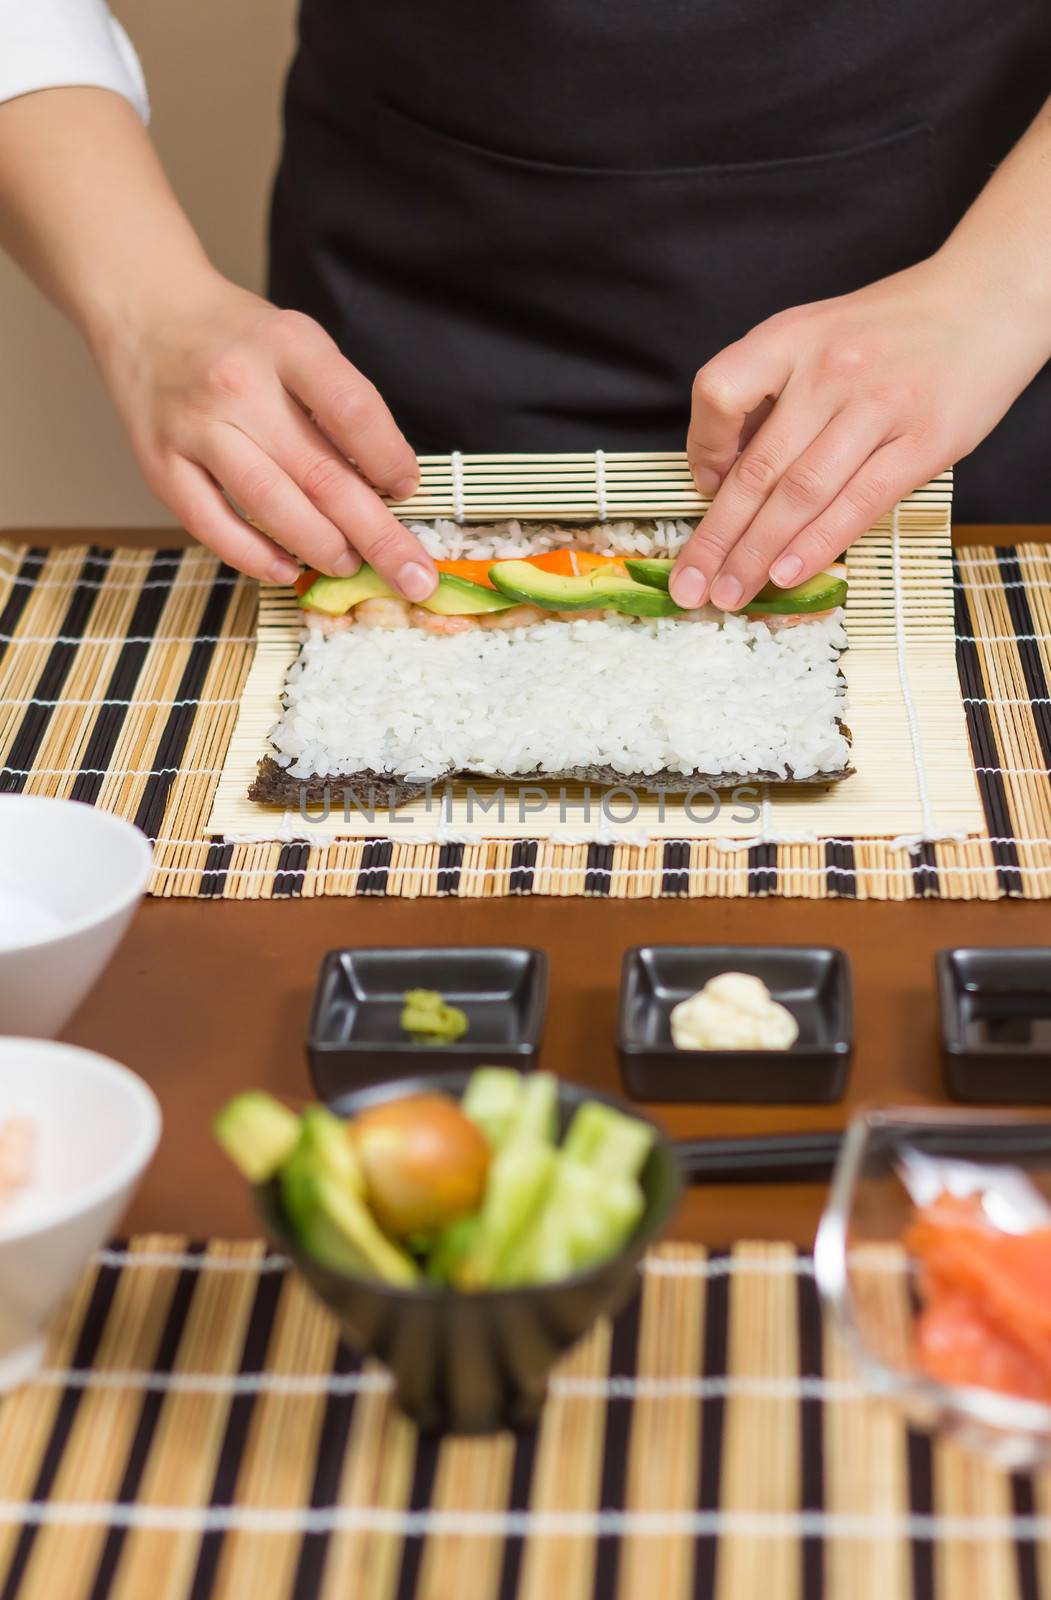 Hands of woman chef rolling up a japanese sushi by doble.d